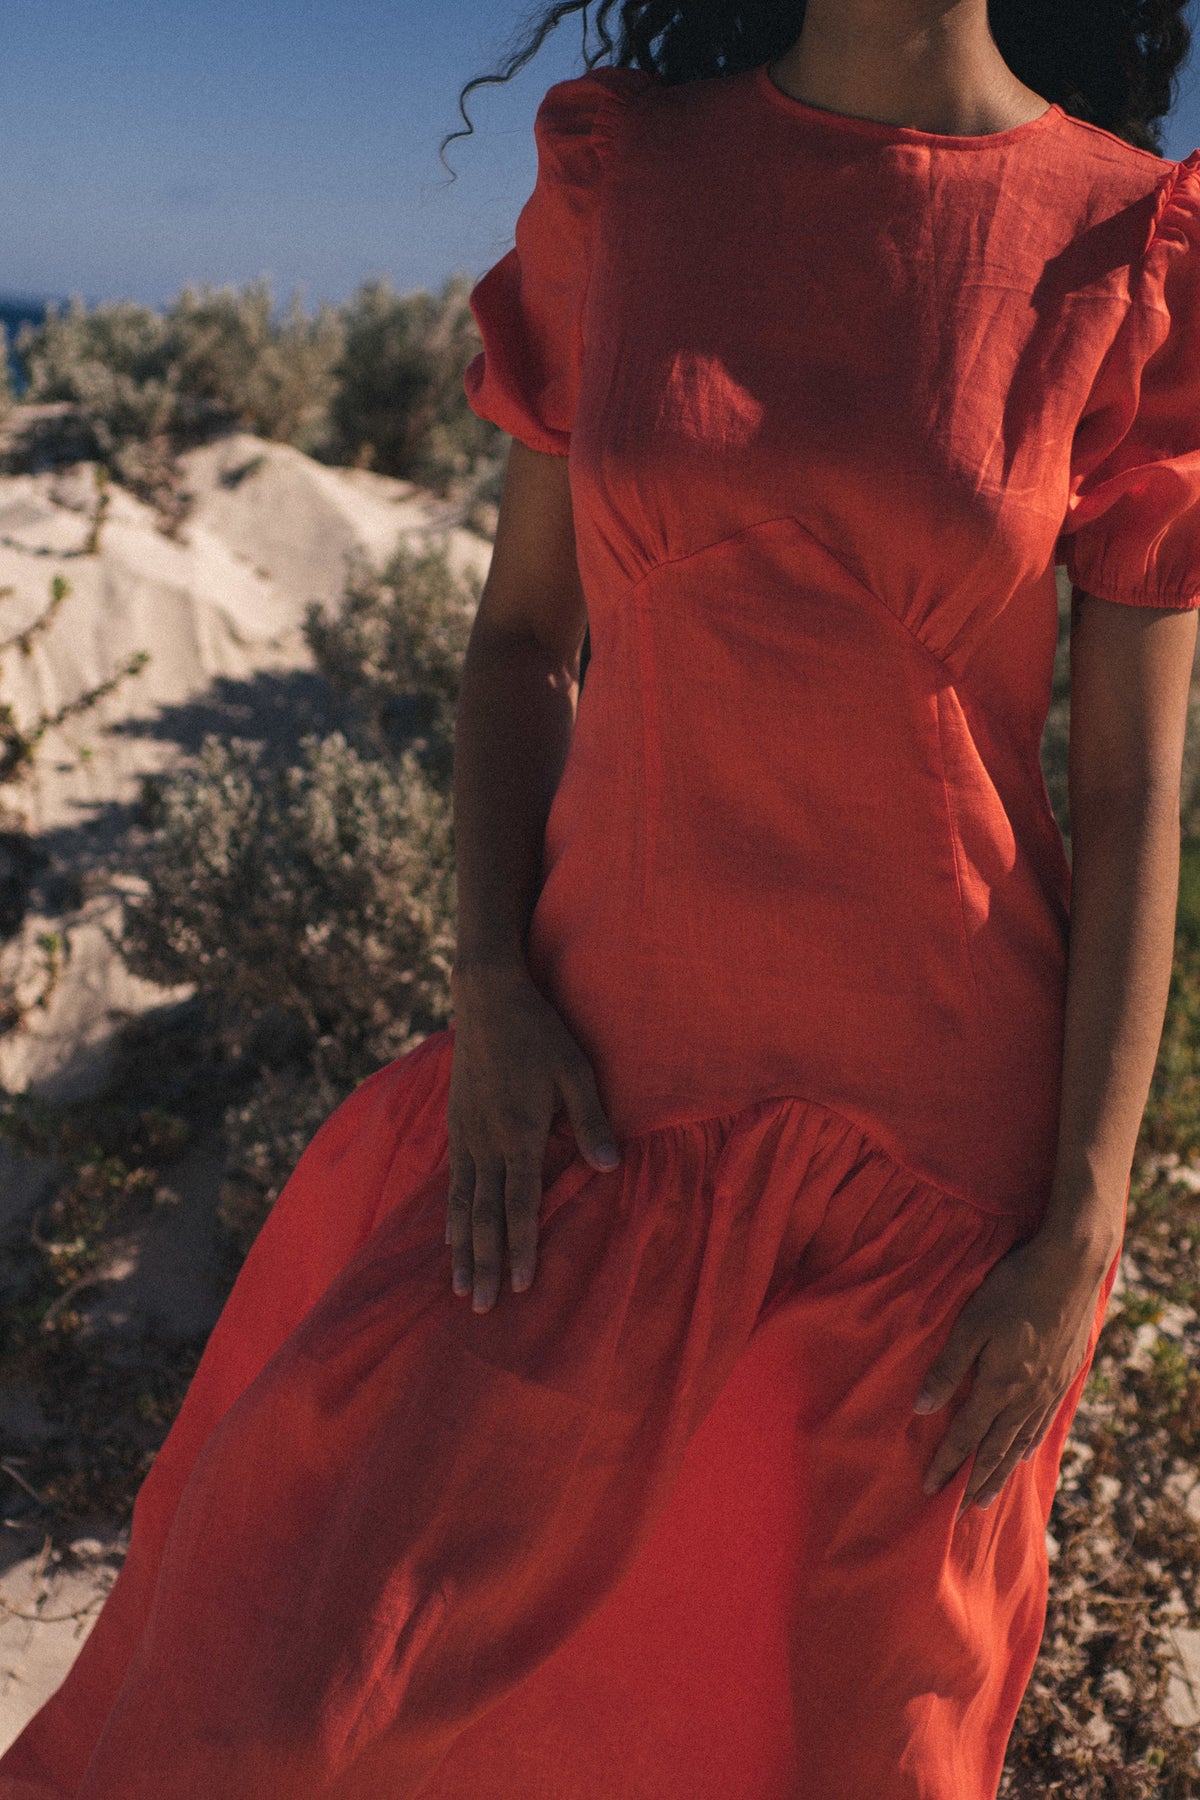 Label - Coral Universal | The Dress Name